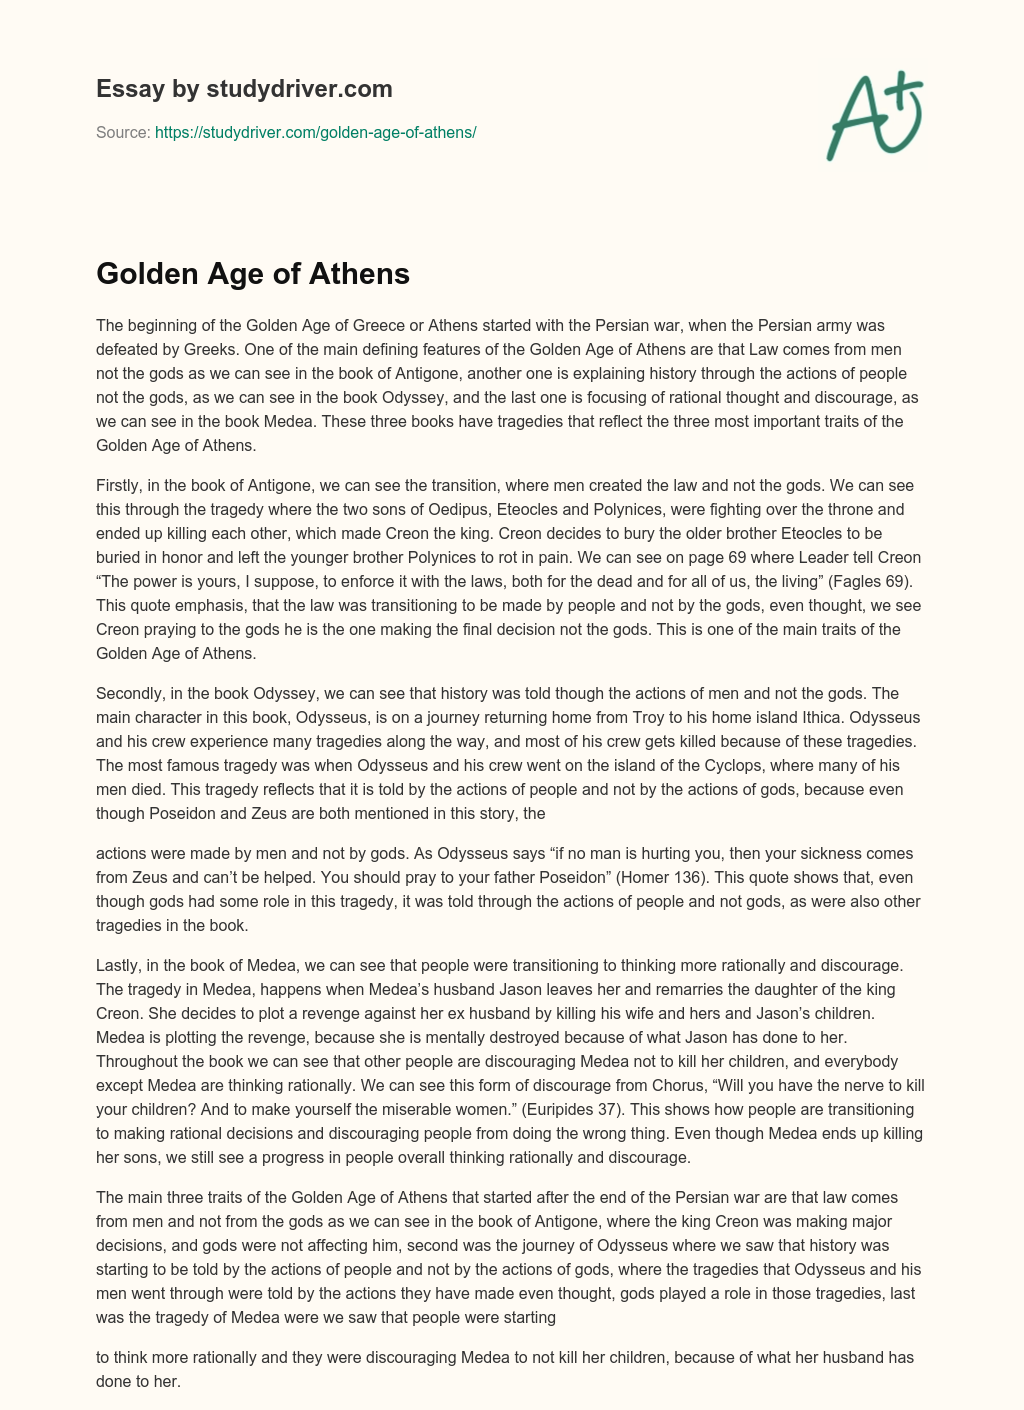 Golden Age of Athens essay